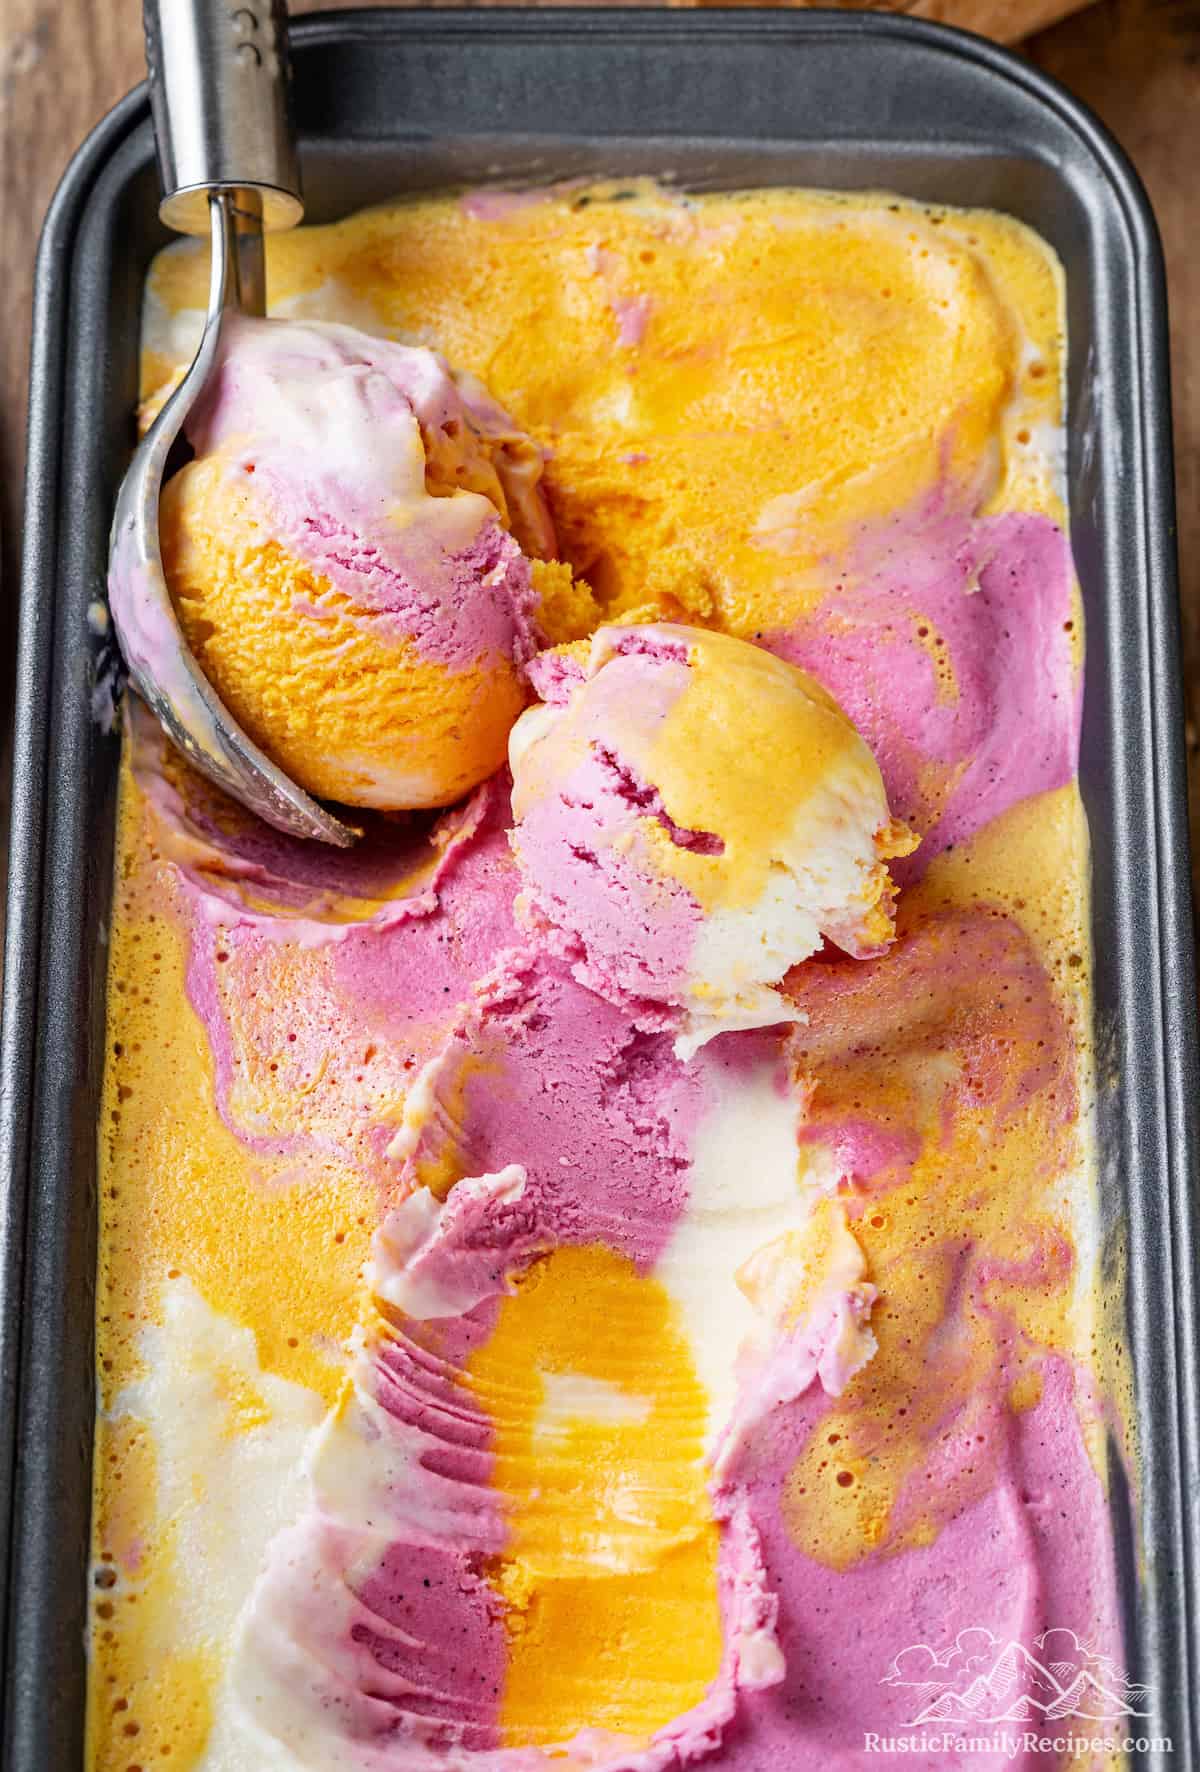 Top view of rainbow sherbet in a loaf pan, with an ice cream scoop.